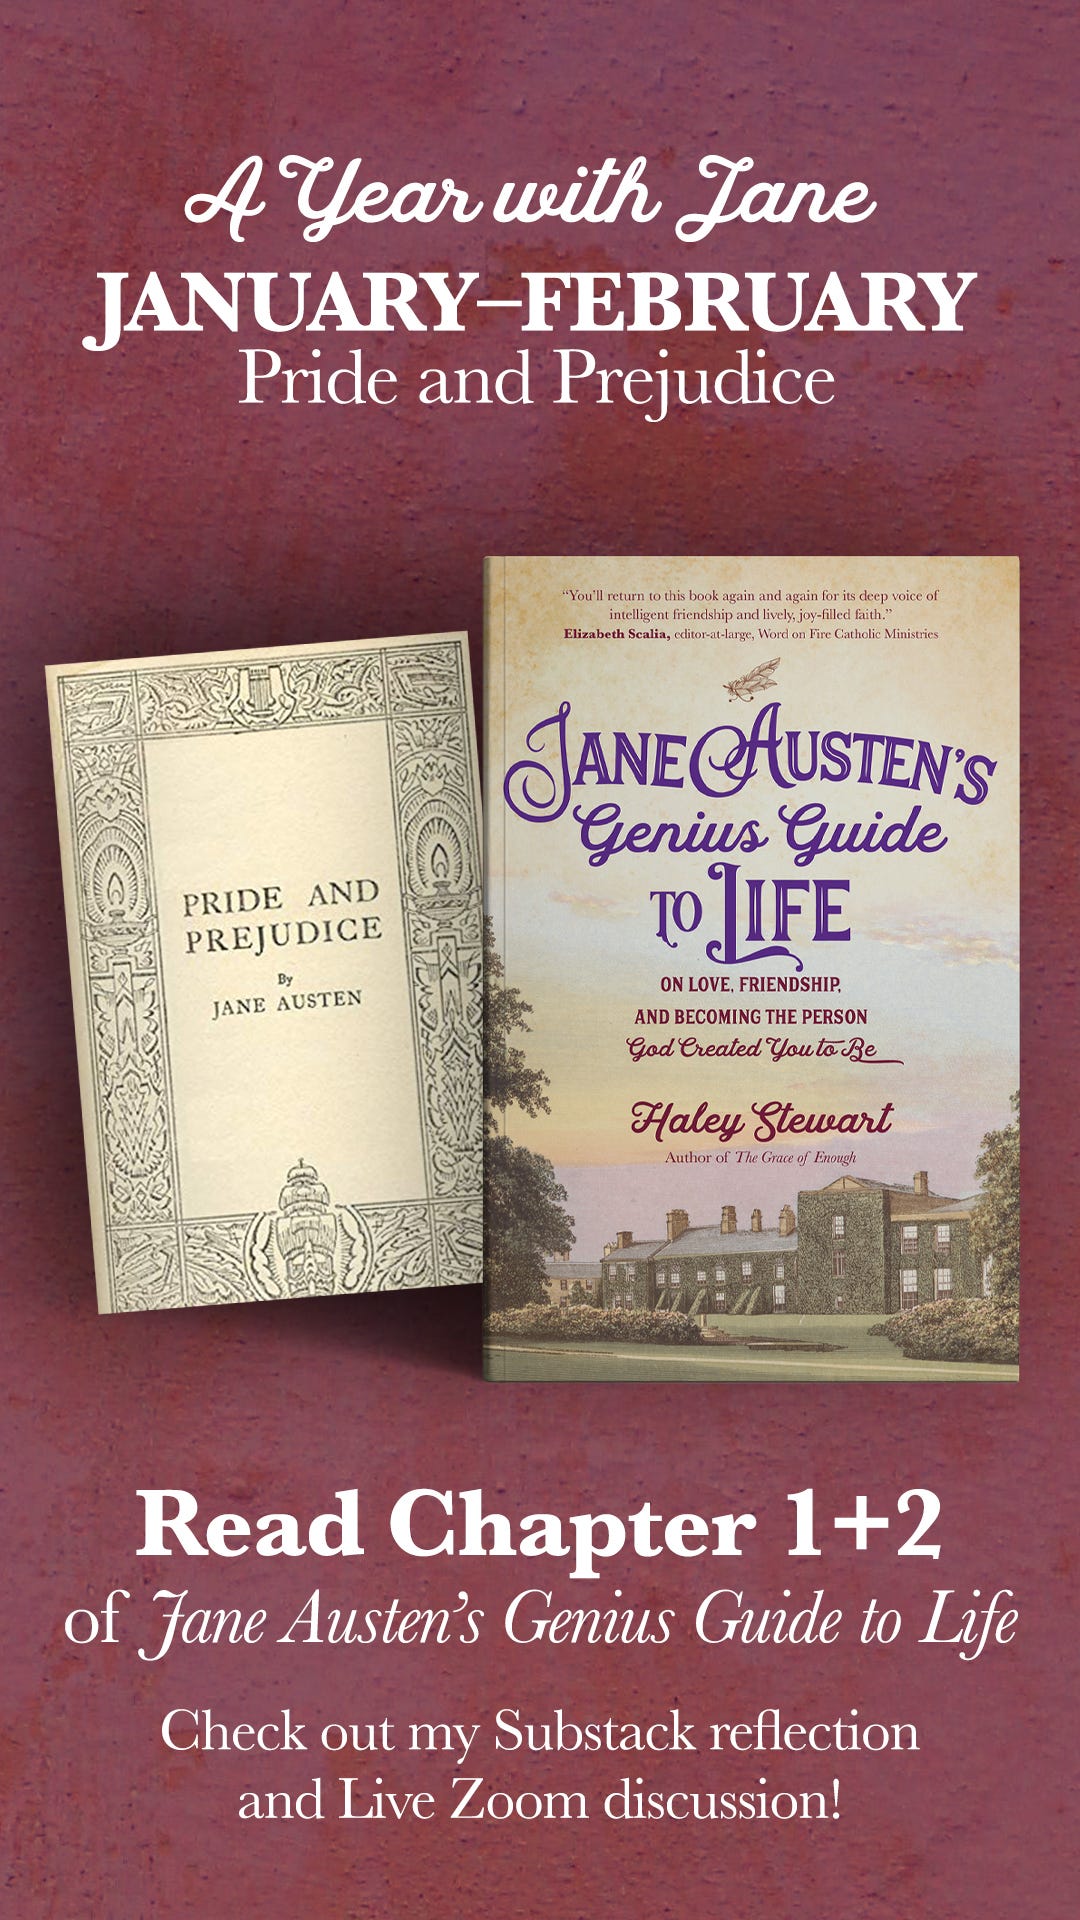 Jane Austen's Genius Guide to Life: On Love, Friendship, and